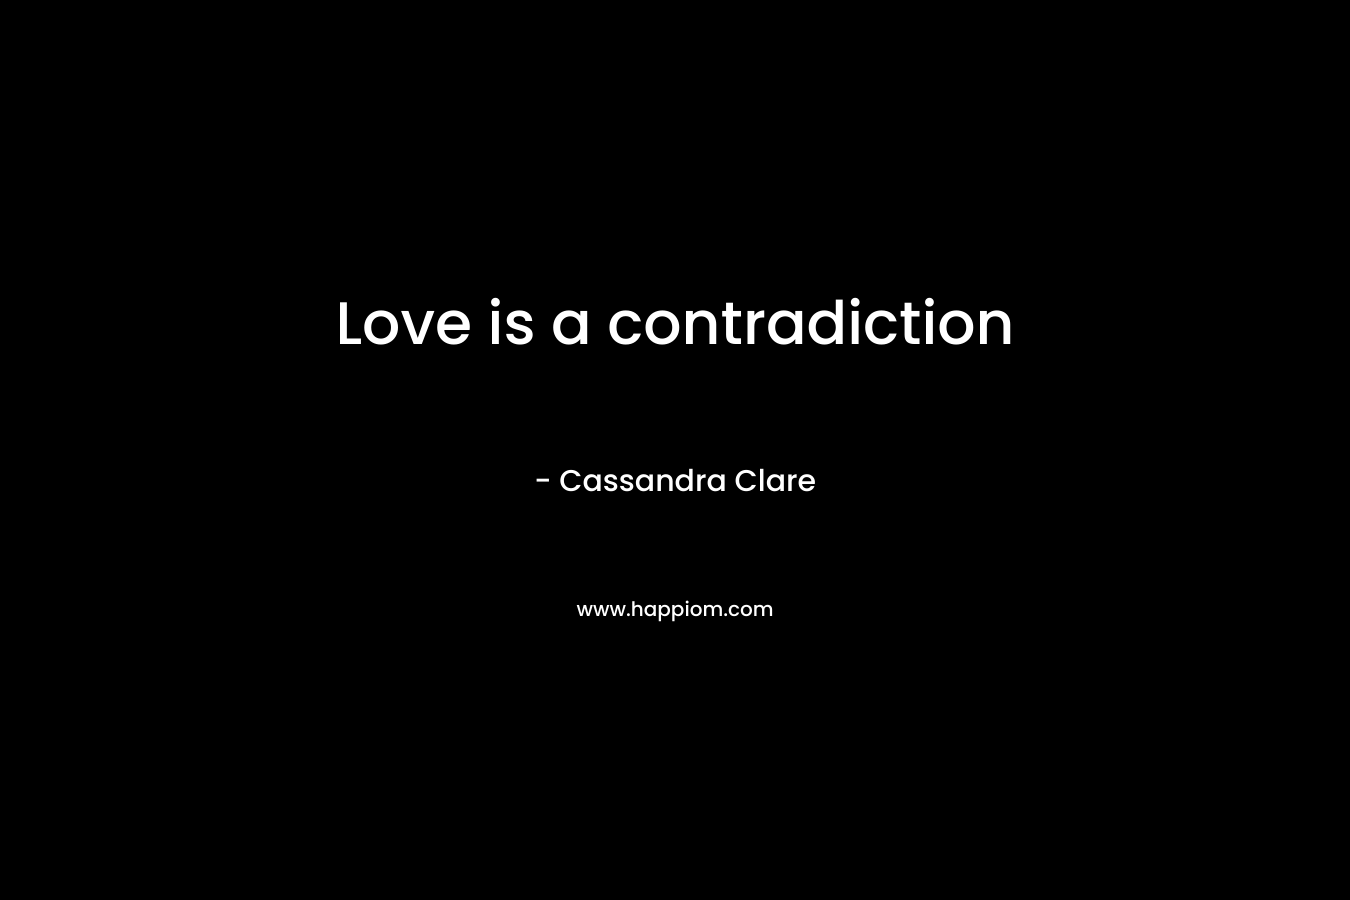 Love is a contradiction